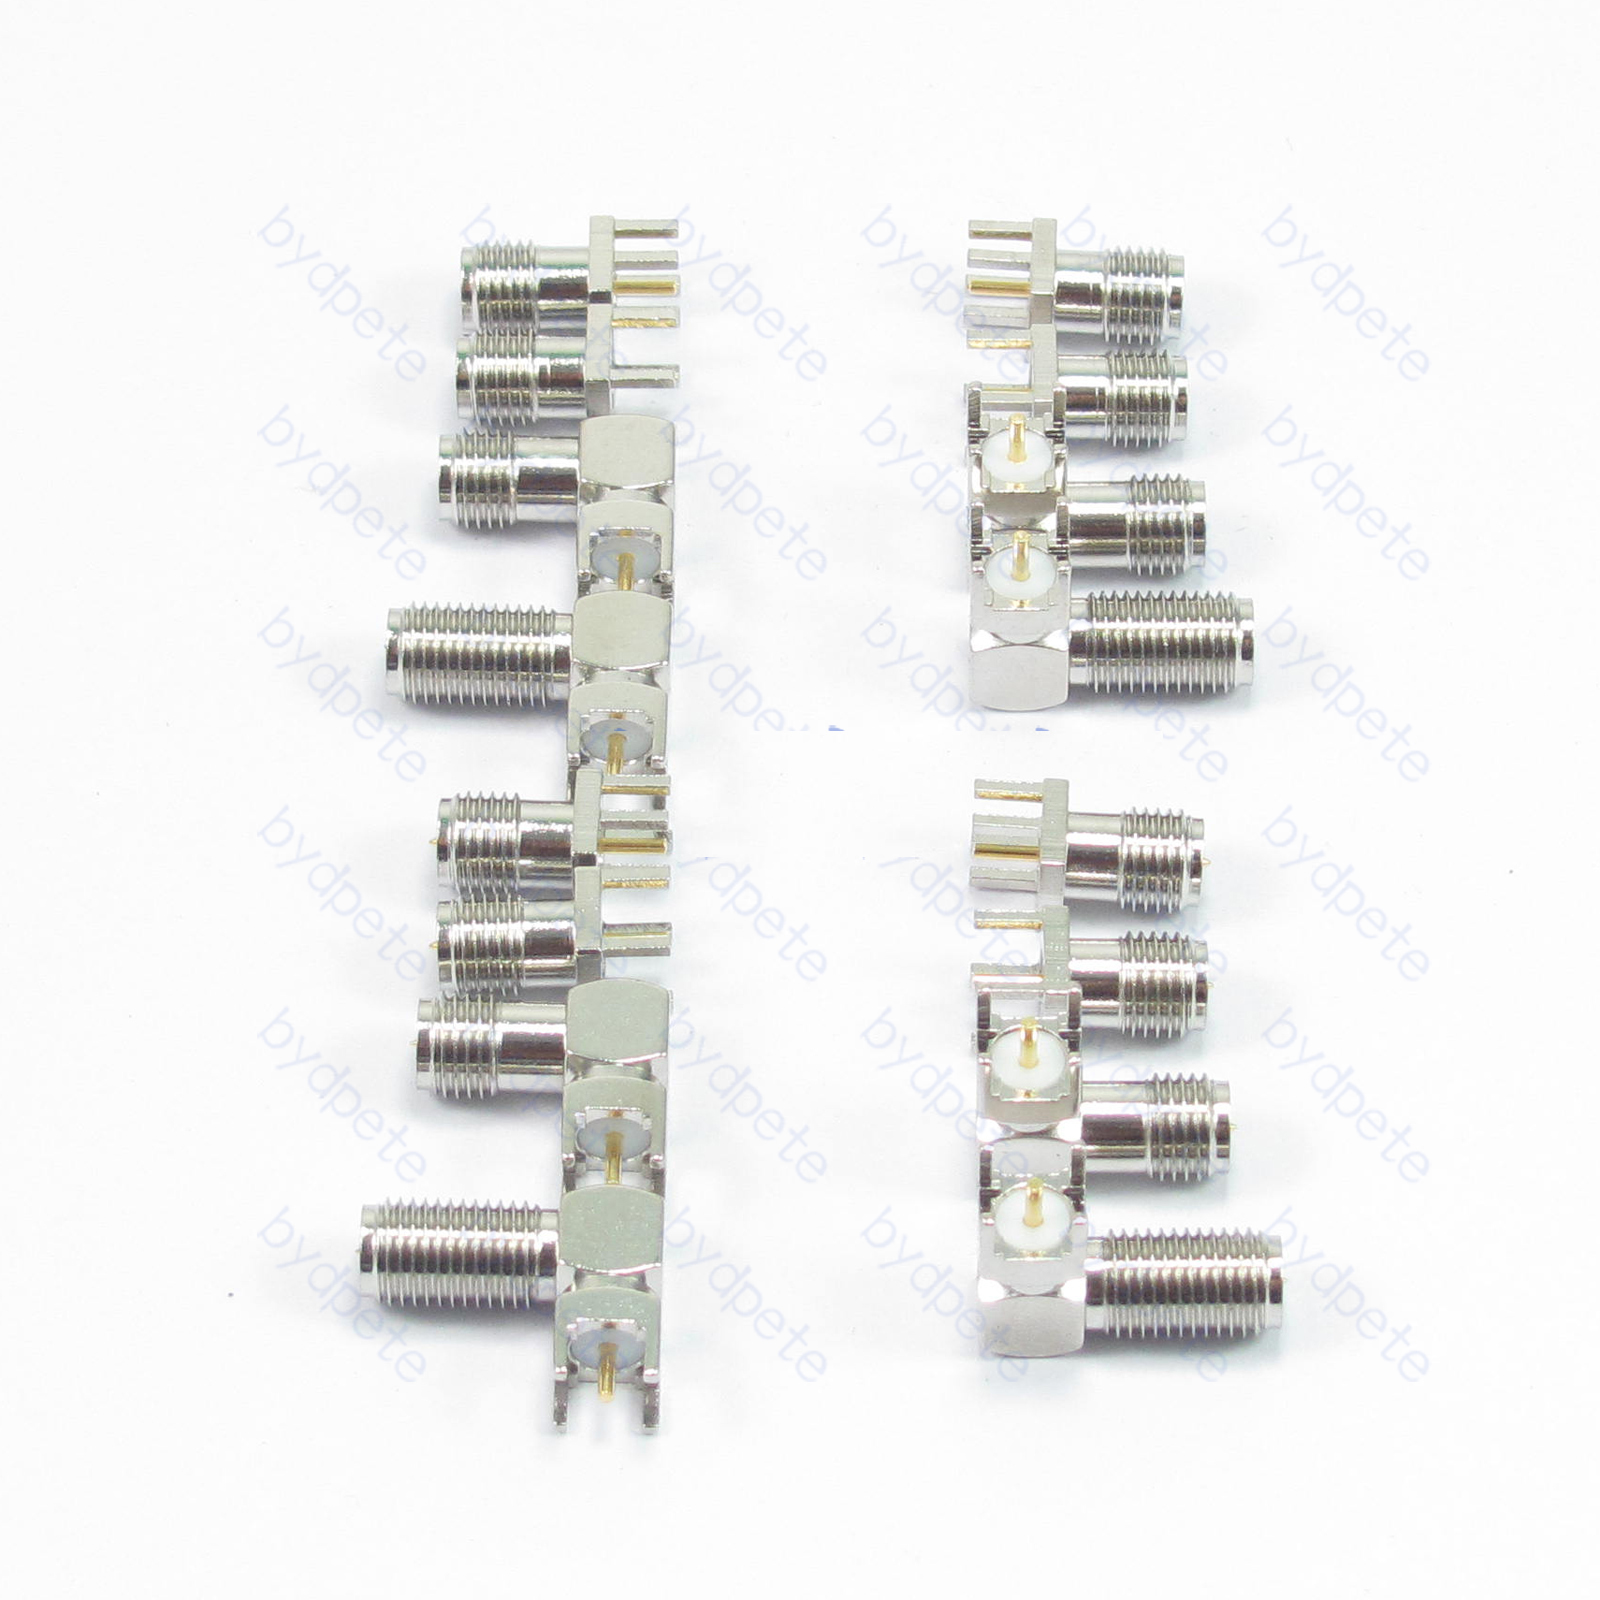 RP-SMA Female Connector Reverse polarity Nickel Plated Edge Mount Solder PCB 50ohms 50ohm Coax Coaxial bydpete